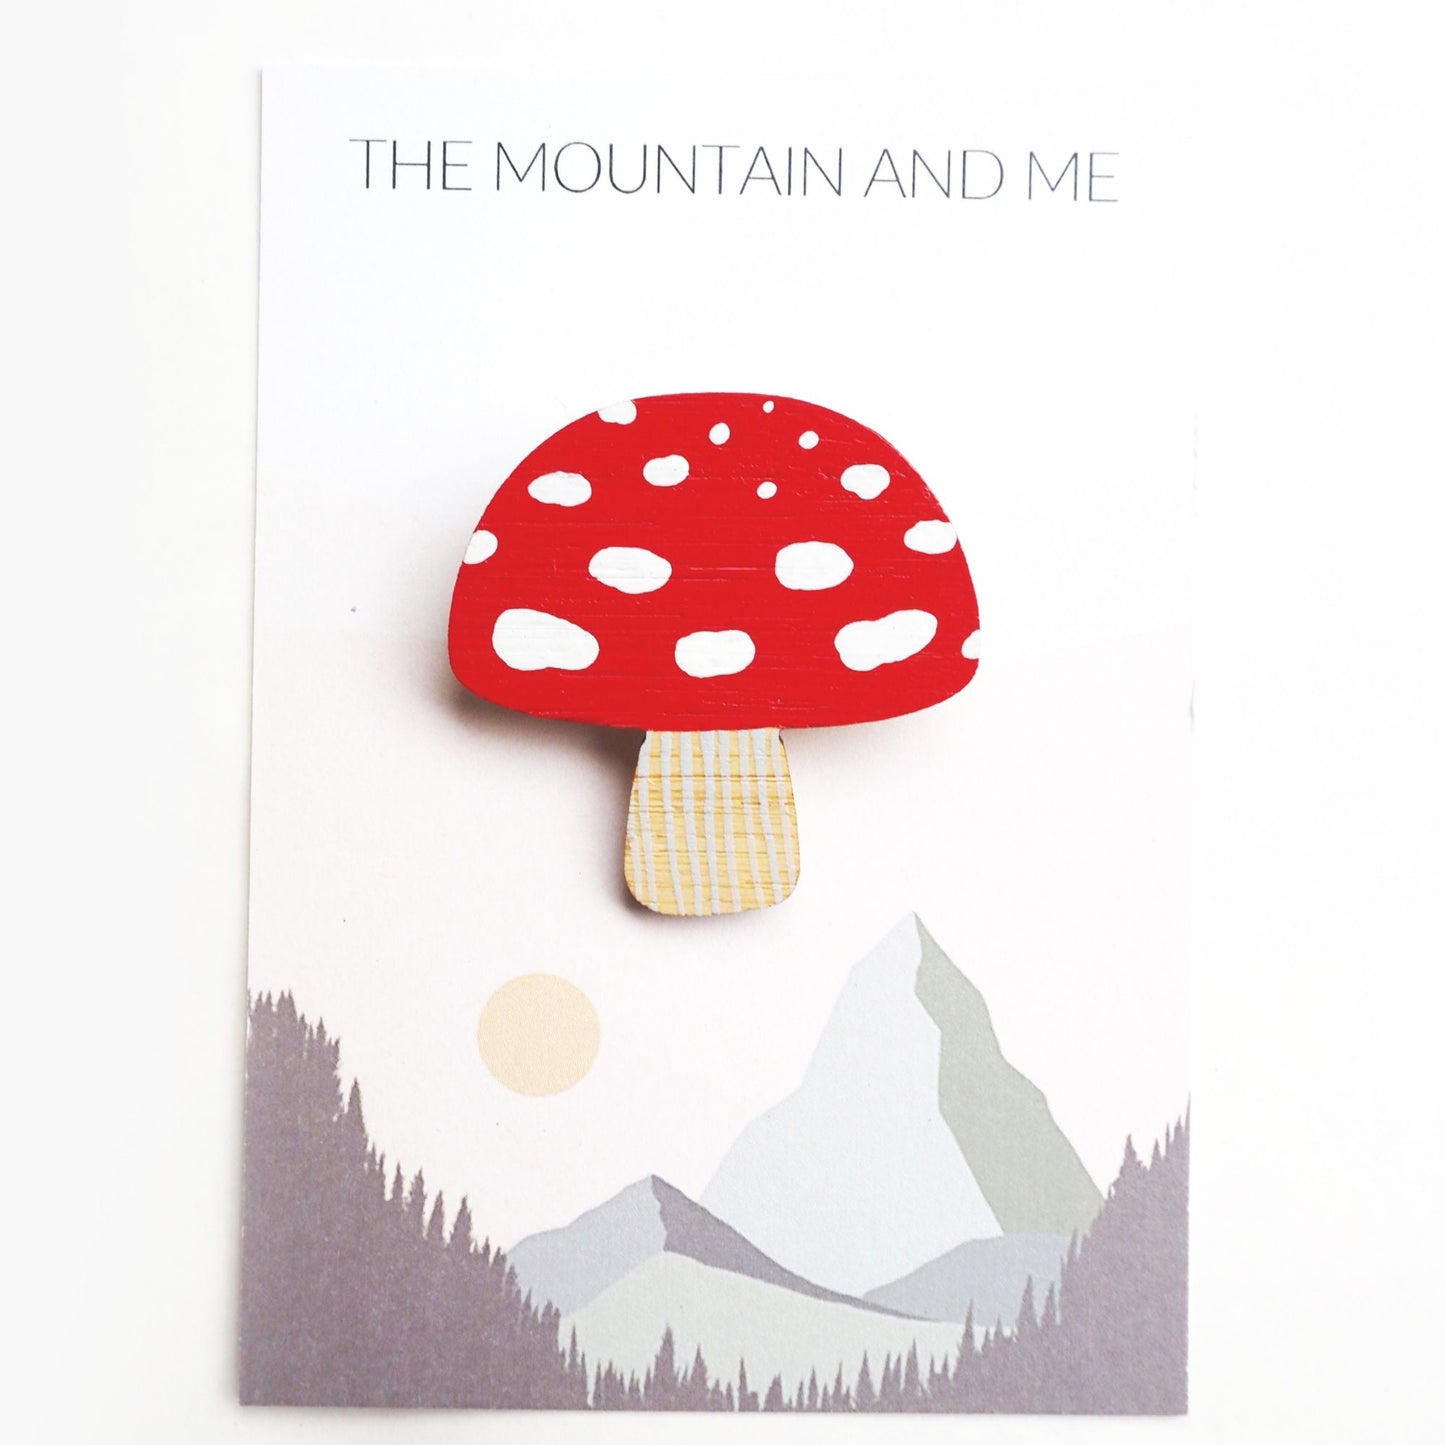 Toadstool brooch on the mountain and Me branded backing card and white backdrop.